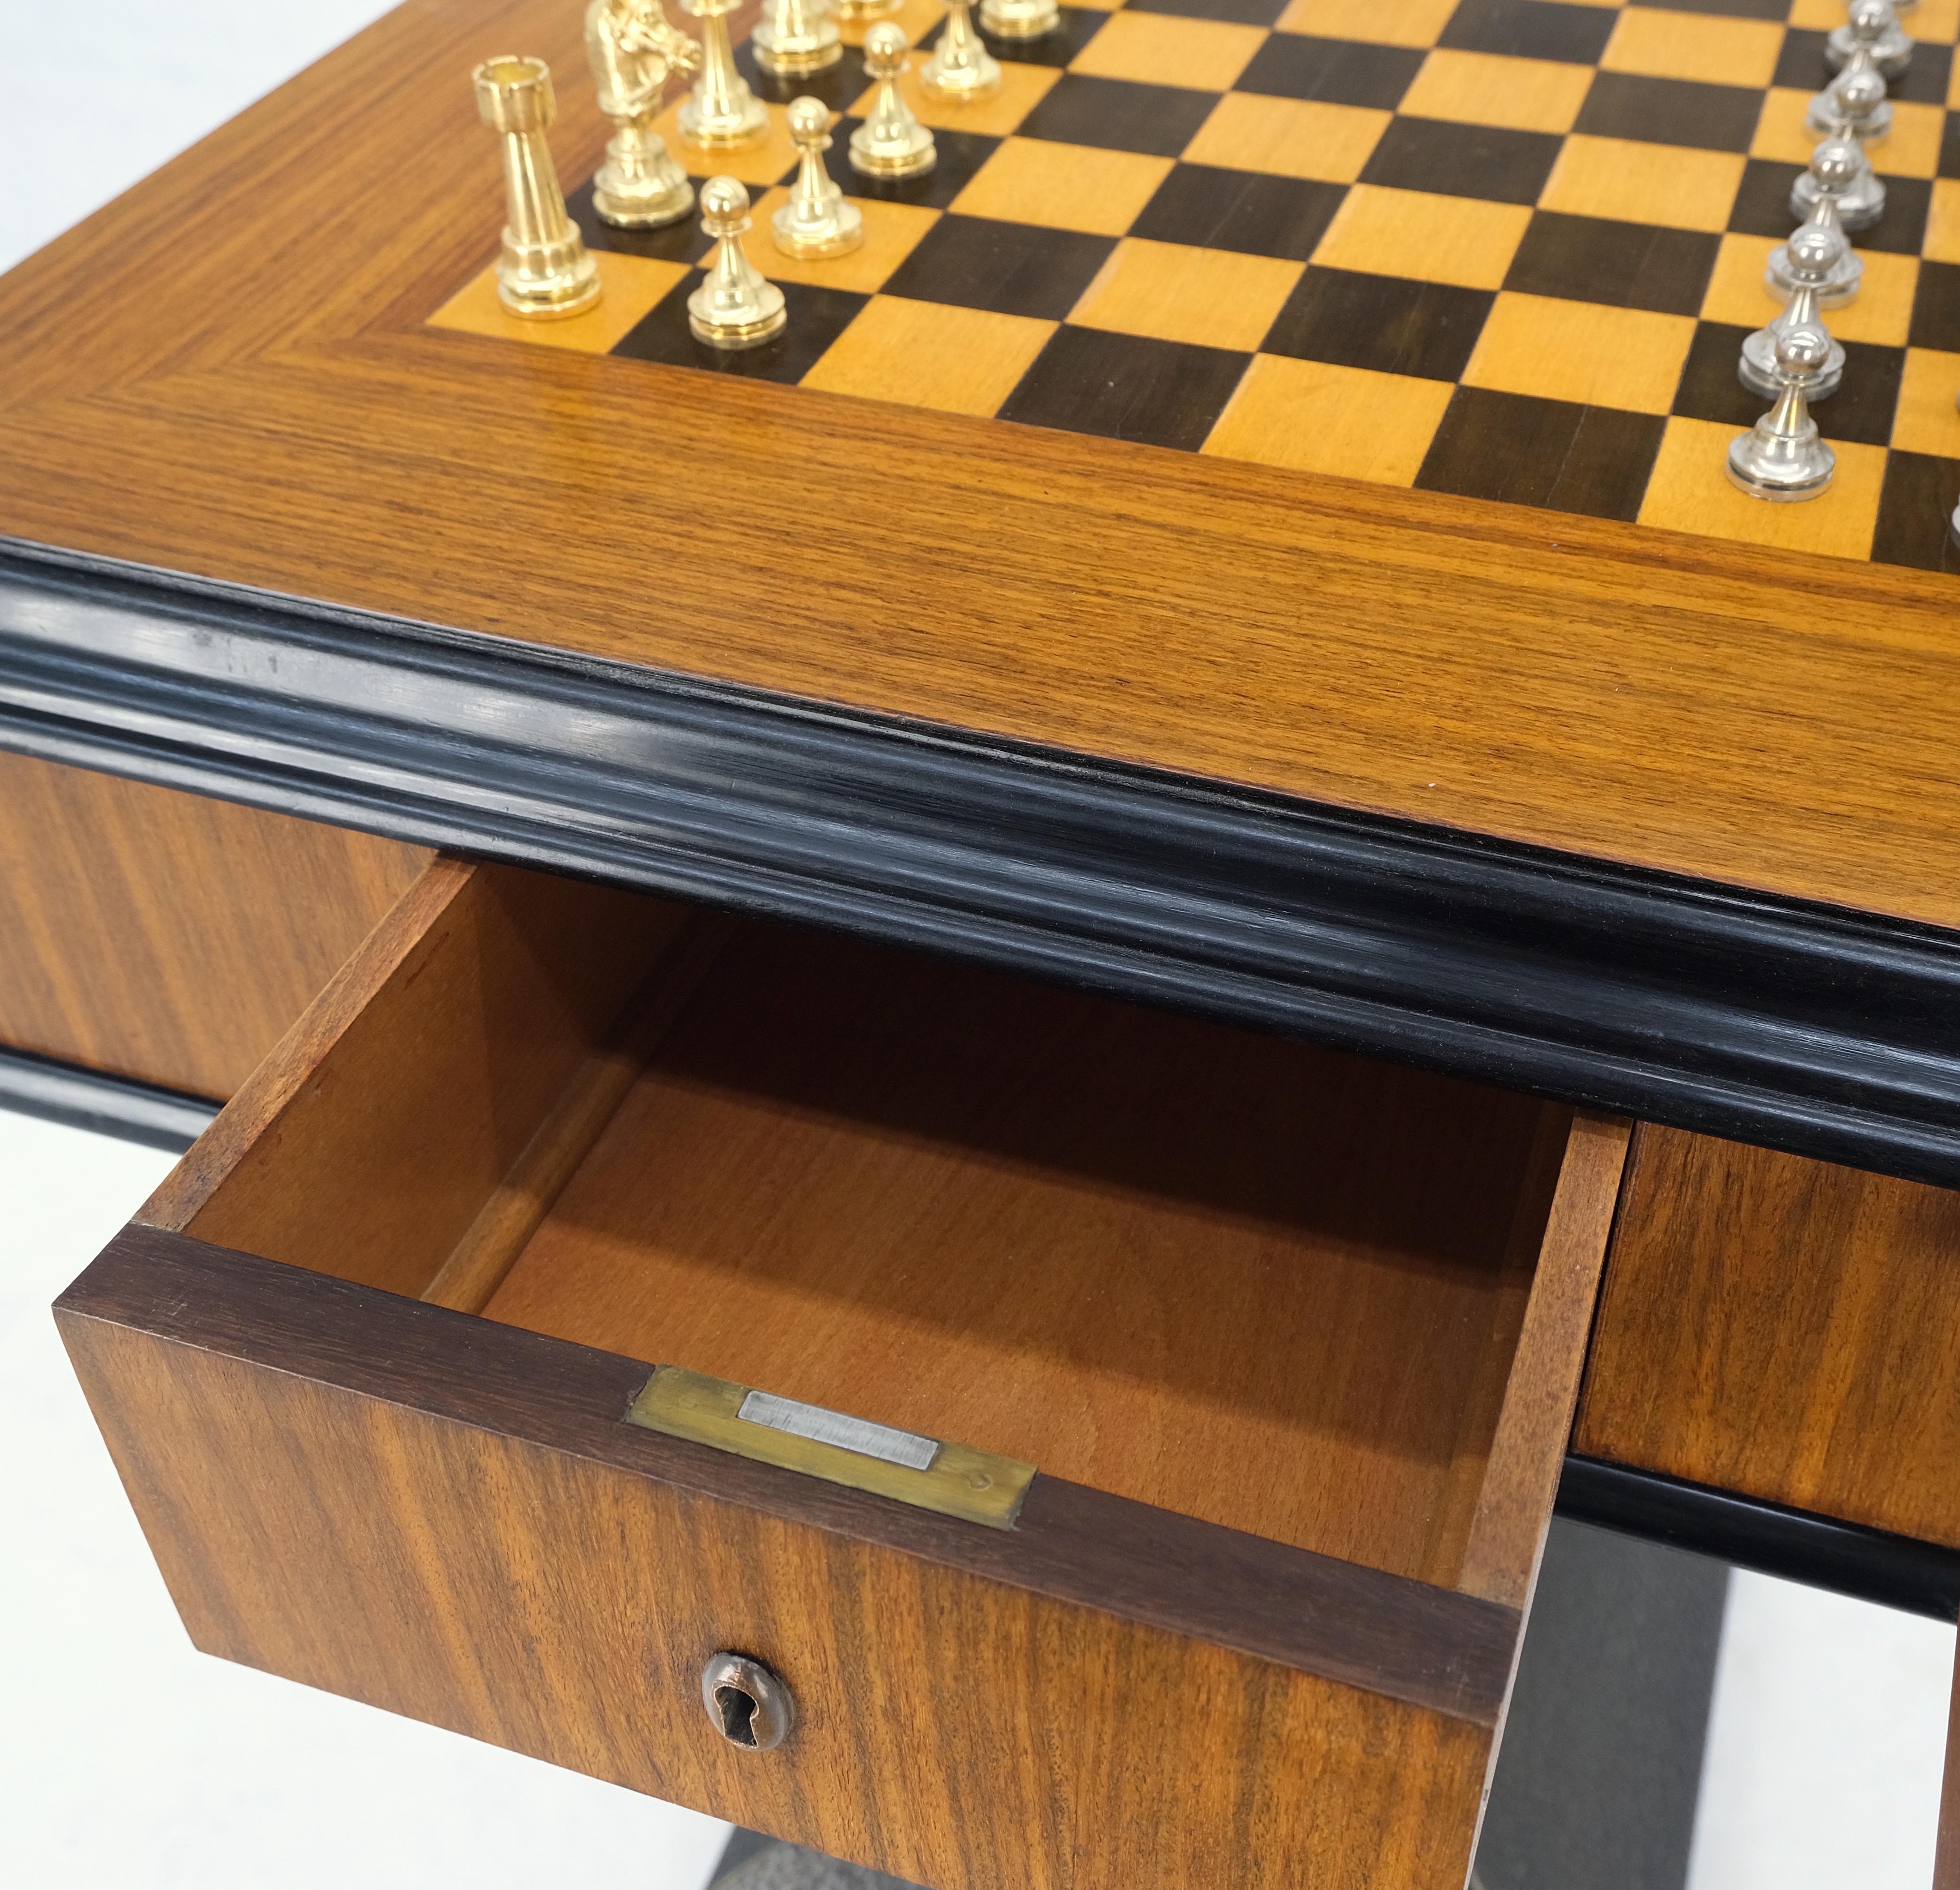 Brass Art Deco Single Pedestal Square Game Table Pull Out Trays Chess Board Set Mint! For Sale